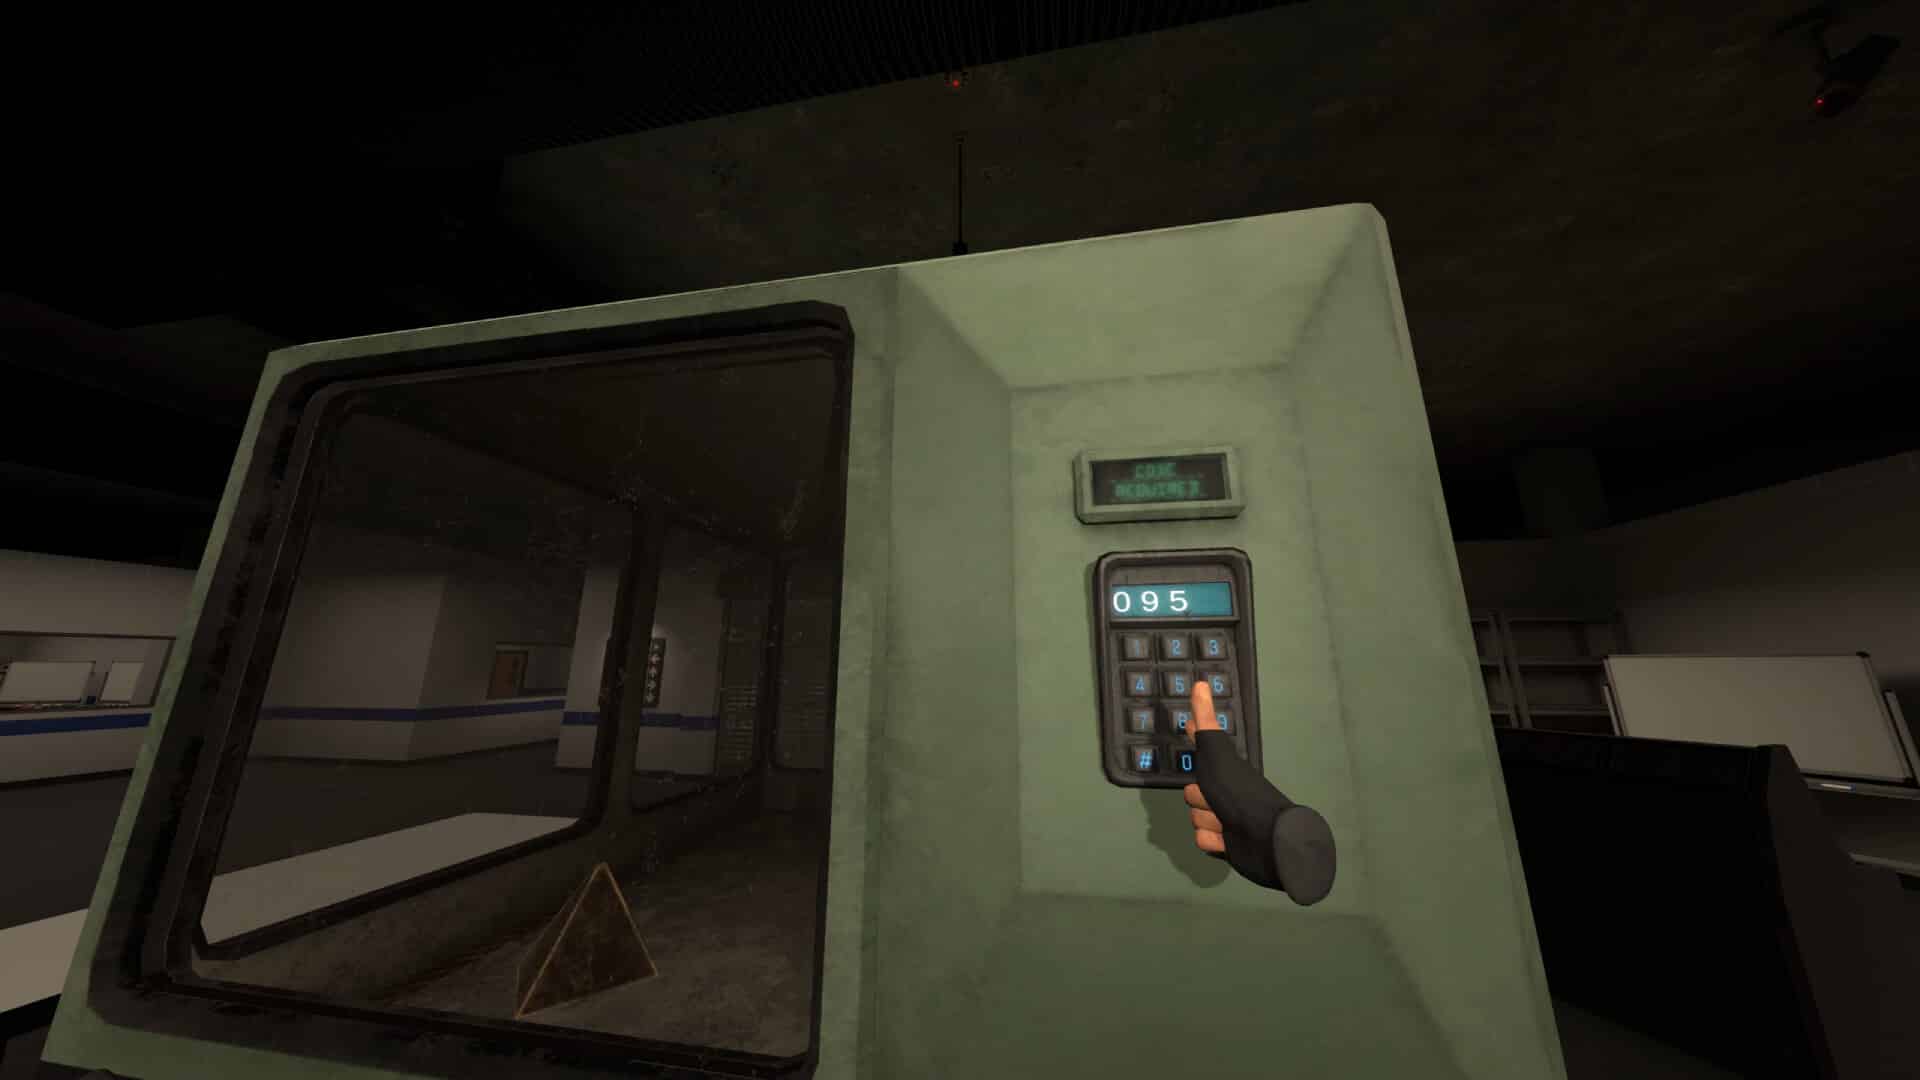 Project: Nightlight gameplay of the player punching numbers into a keypad